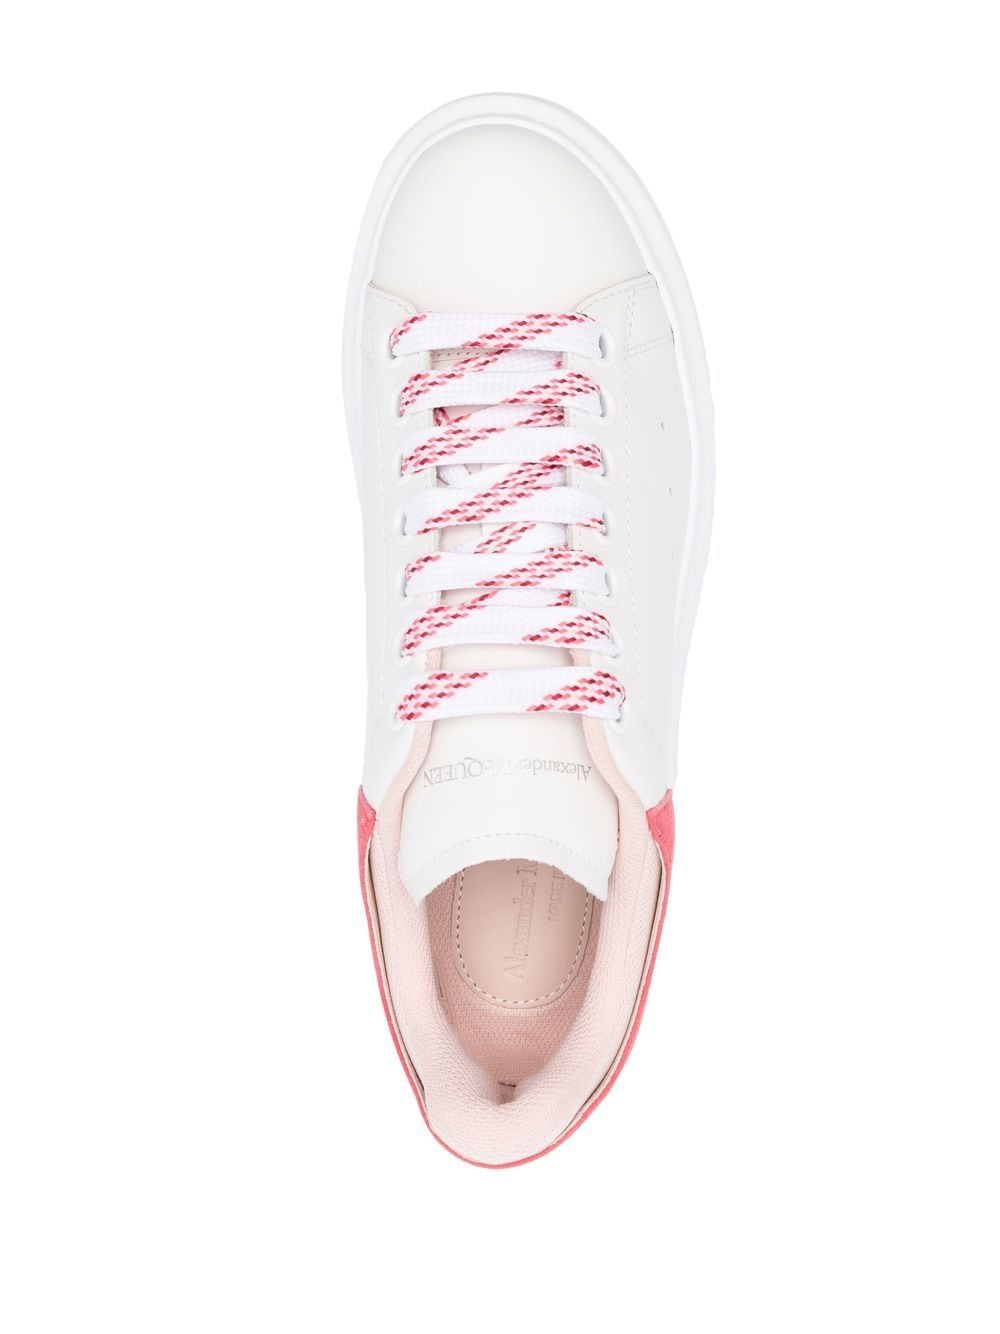 White/light red leather/suede oversized low-top sneakers